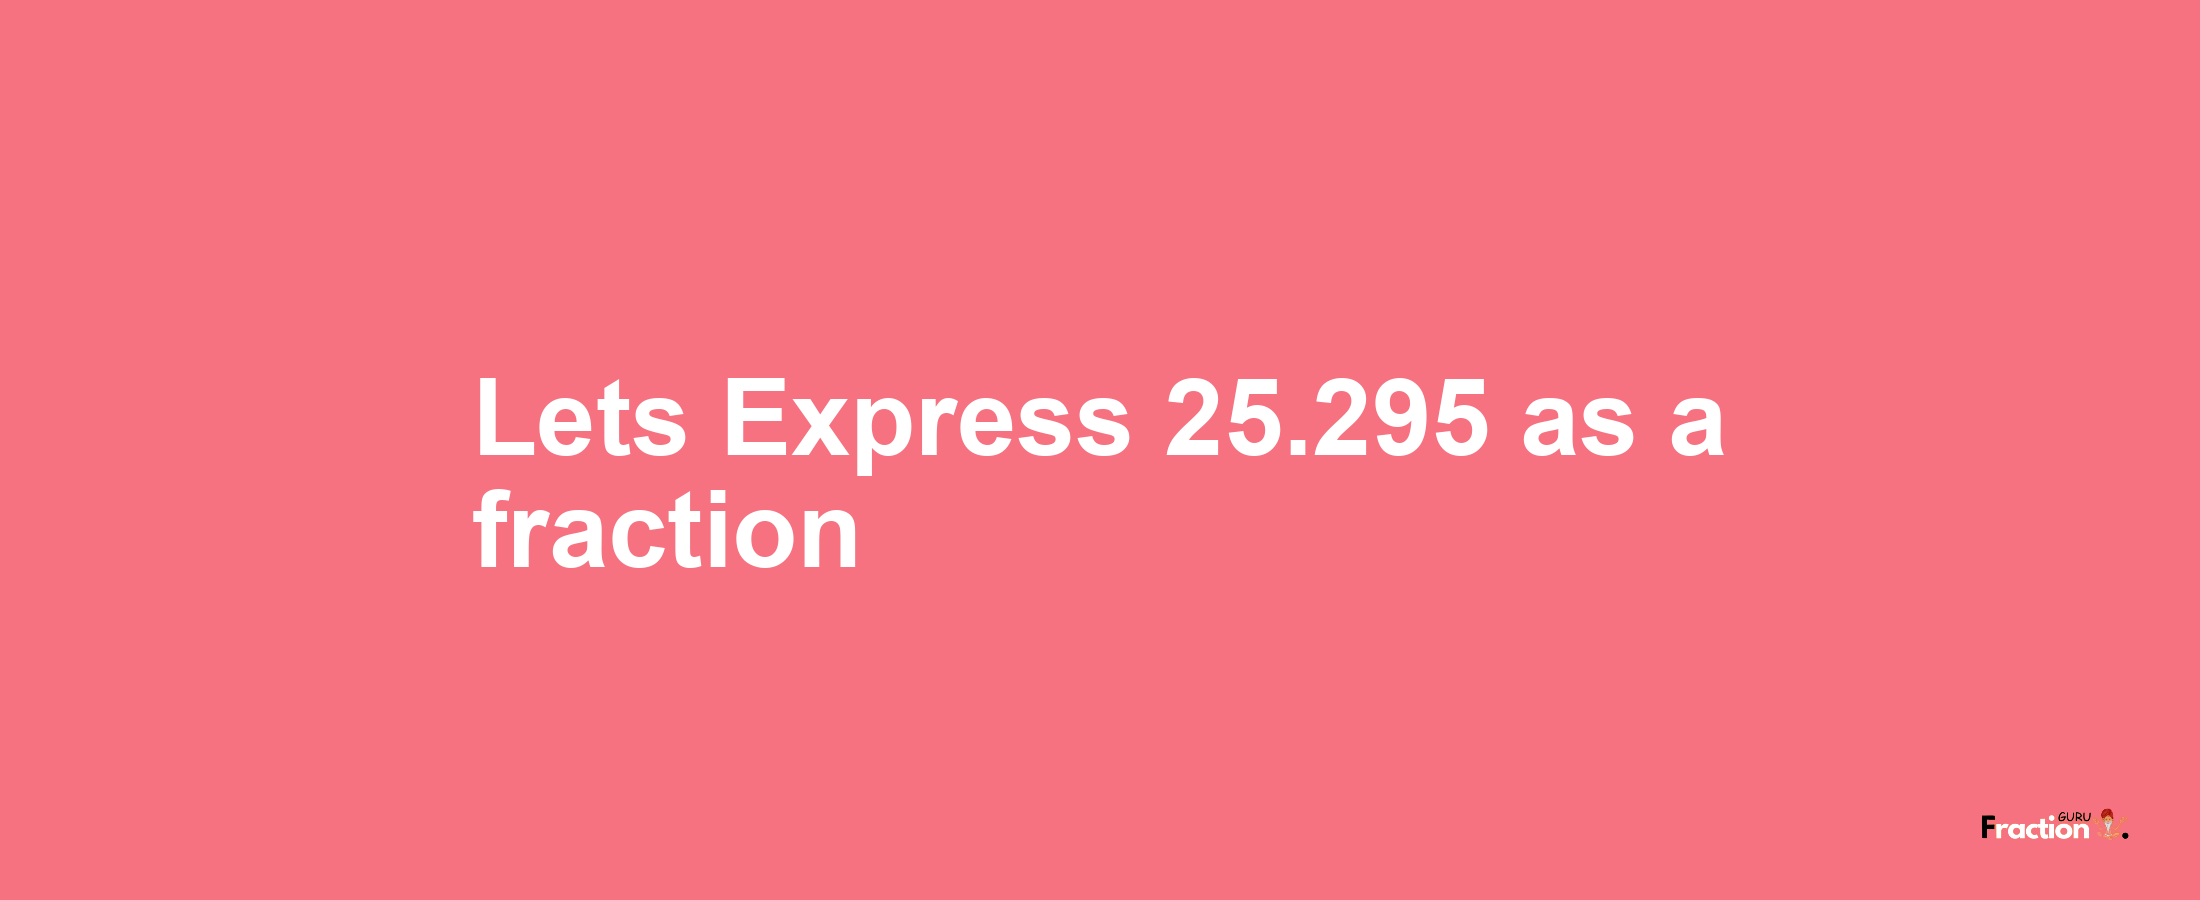 Lets Express 25.295 as afraction